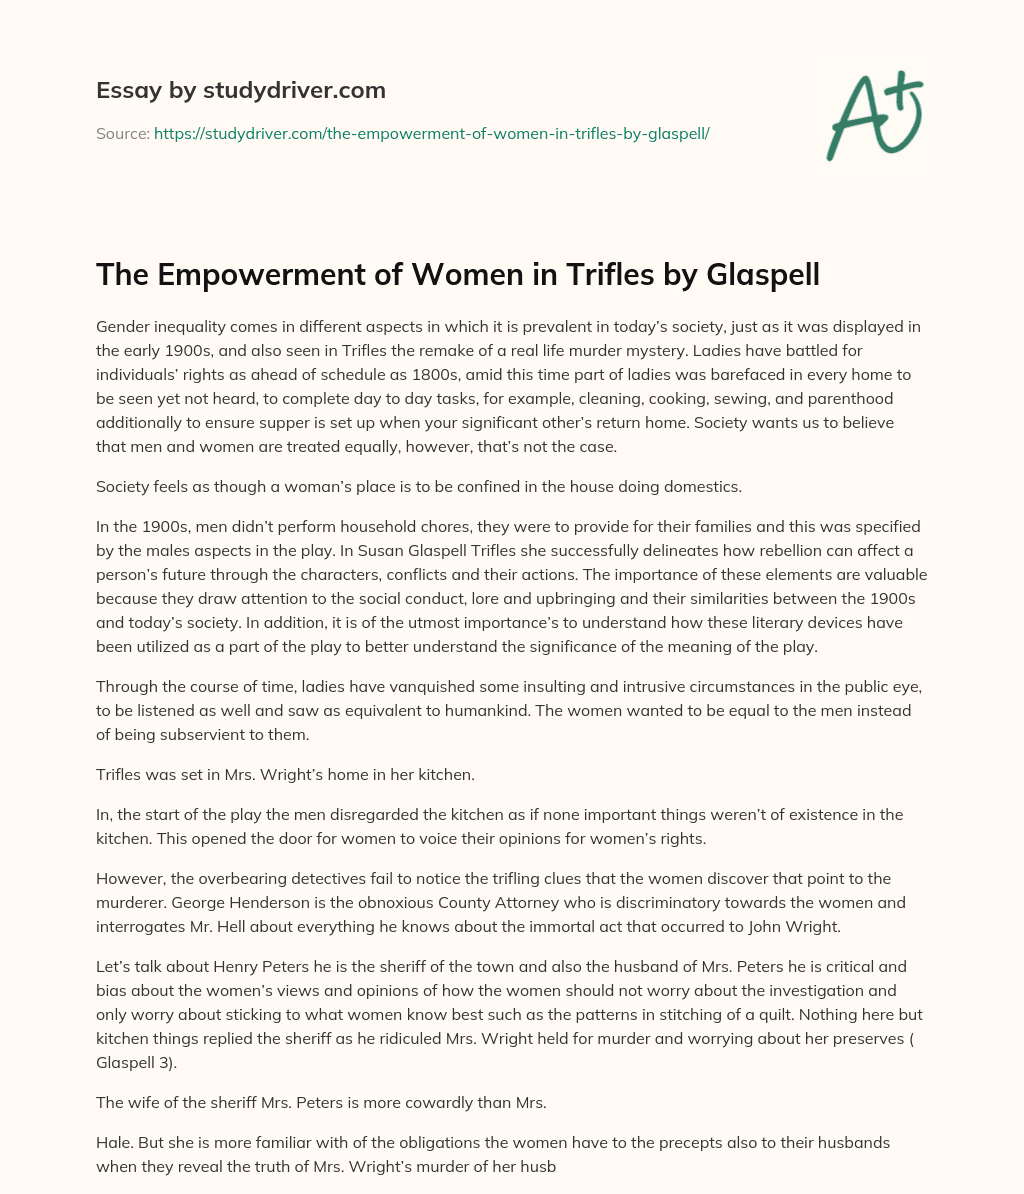 The Empowerment of Women in Trifles by Glaspell essay